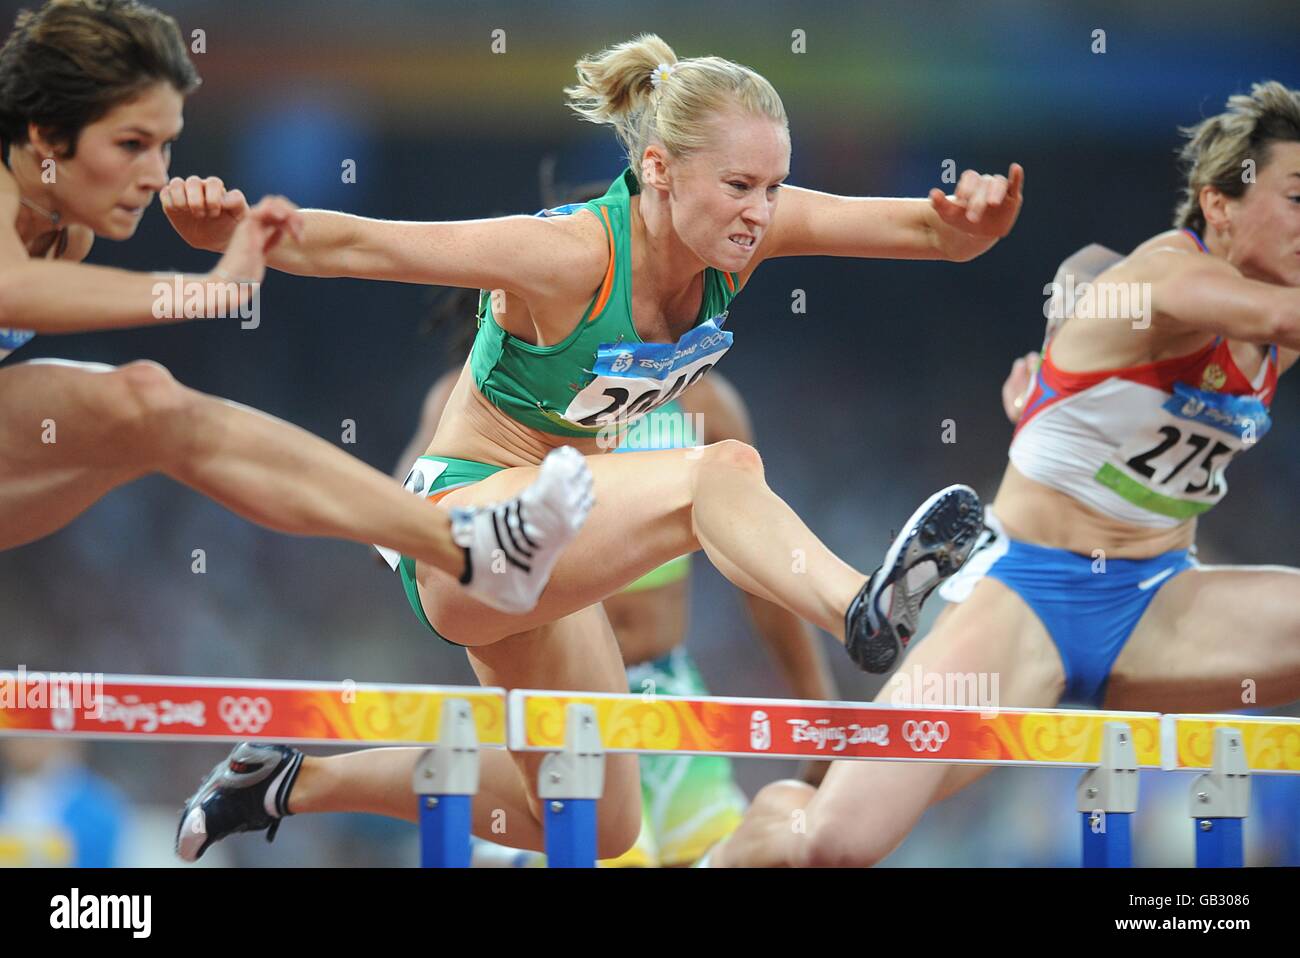 Ireland's Derval O'Rourke competes in the Women's 100m Hurdles Round 1 - Heat 2 at the National Stadium during the 2008 Olympic Games in Beijing. Stock Photo